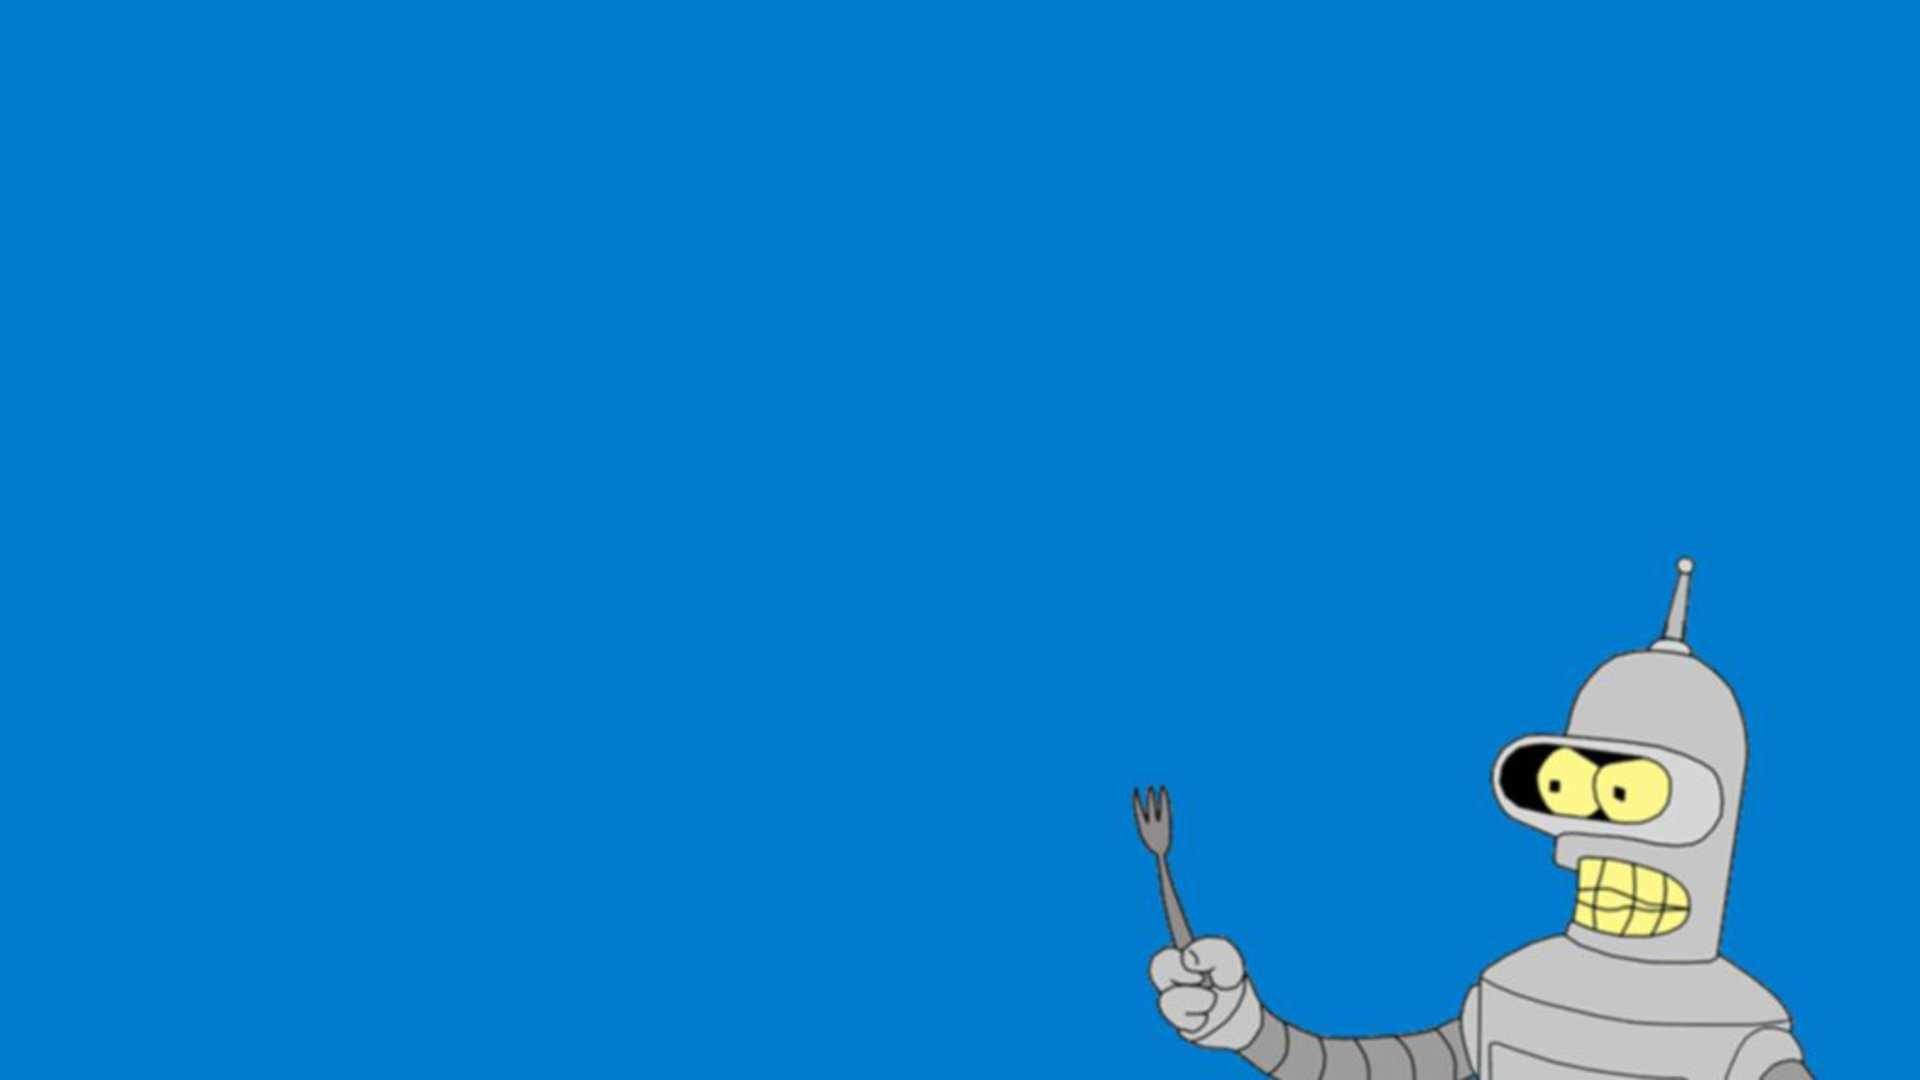 Download 1080p Bender (Futurama) PC background ID:253894 for free